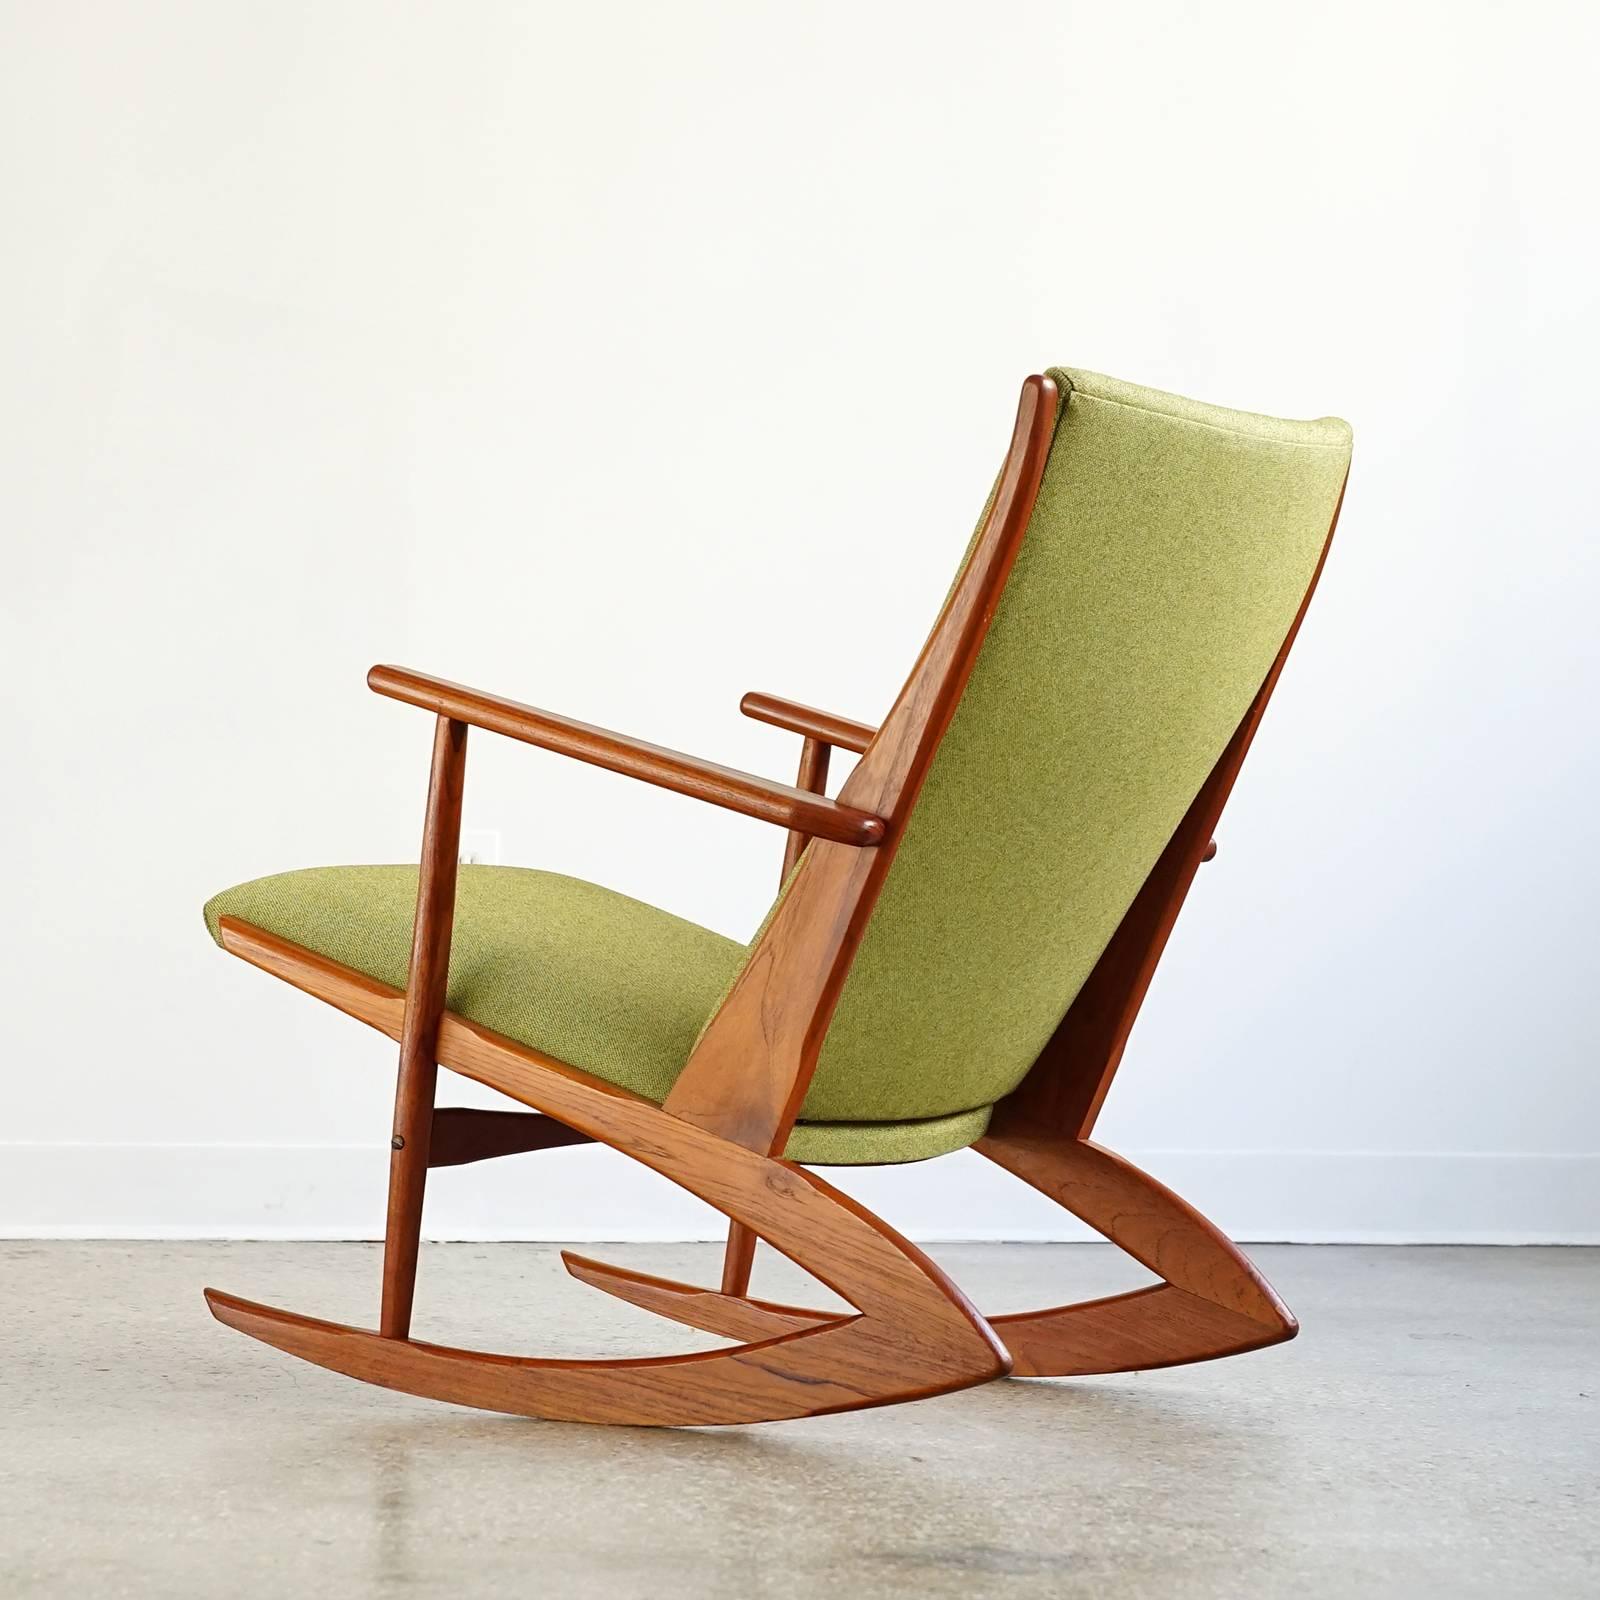 Iconic Danish rocking chair reupholstered in green Knoll Hourglass fabric. Solid teak frame is clean and sturdy with rich tone and grain. Invisible concrete counter weight concealed in the front of the seat allow the rockers to have a shorter, more